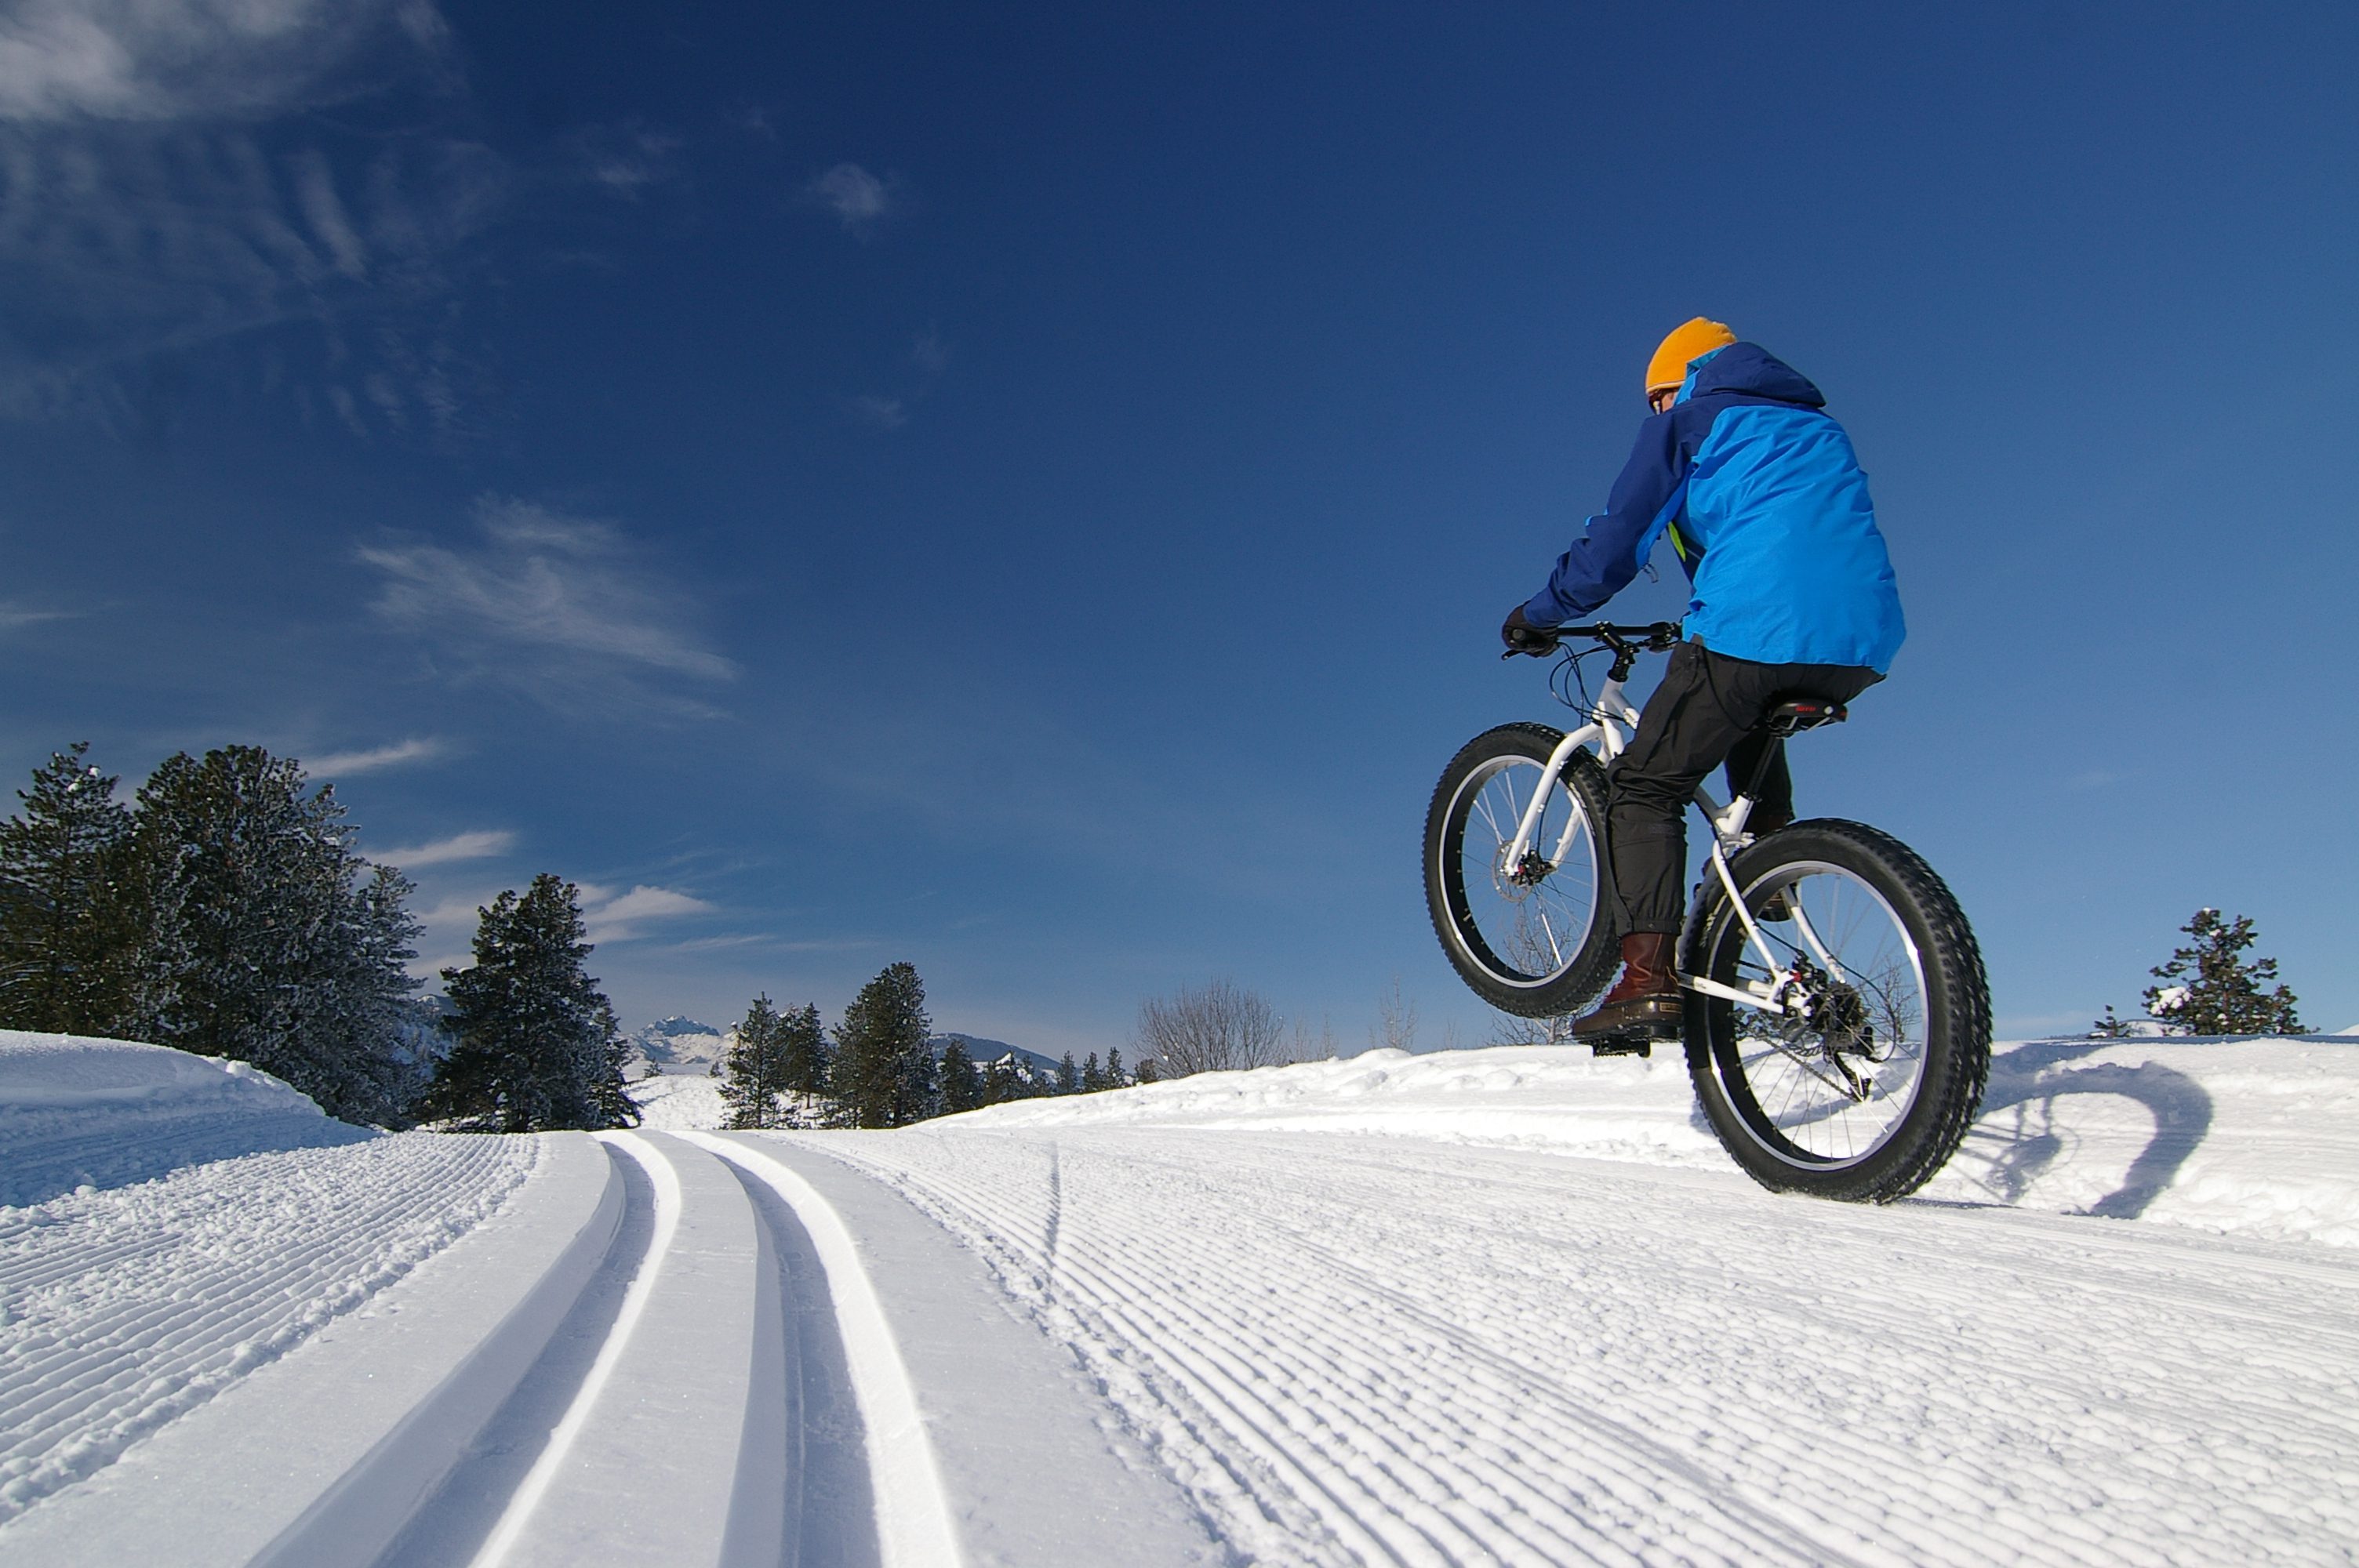 Biking in the snow is super fun on a fat bike. The tires are wide enough so that traction is great, and the tires do not sink into the packed snow of the cross country ski trail.